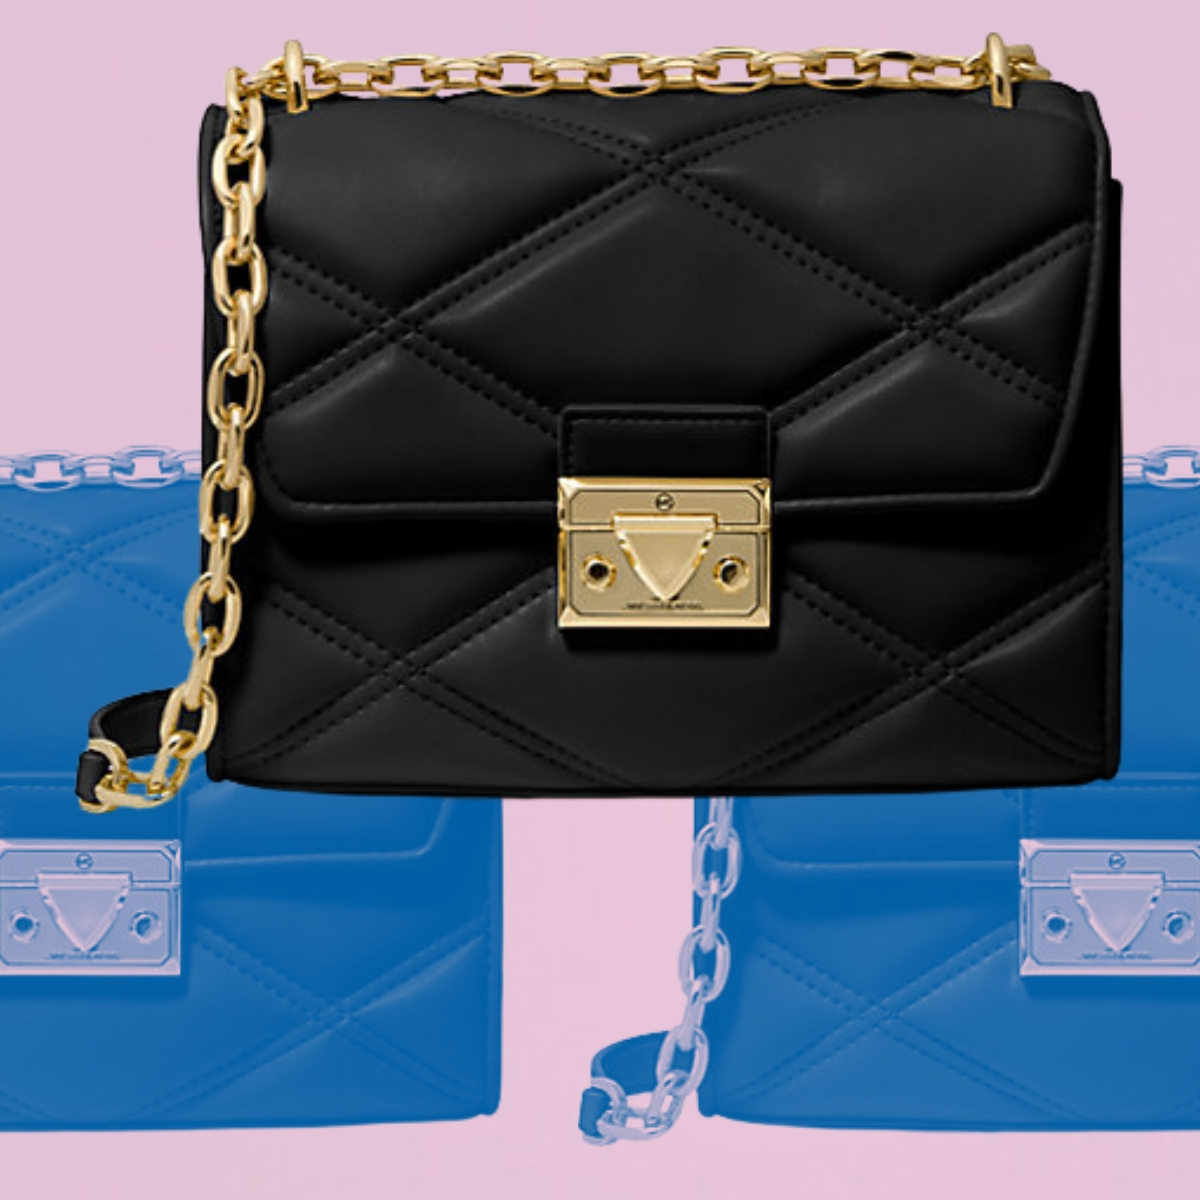 Score a $628 Michael Kors Crossbody for $99 & More Deals Up to 84% Off